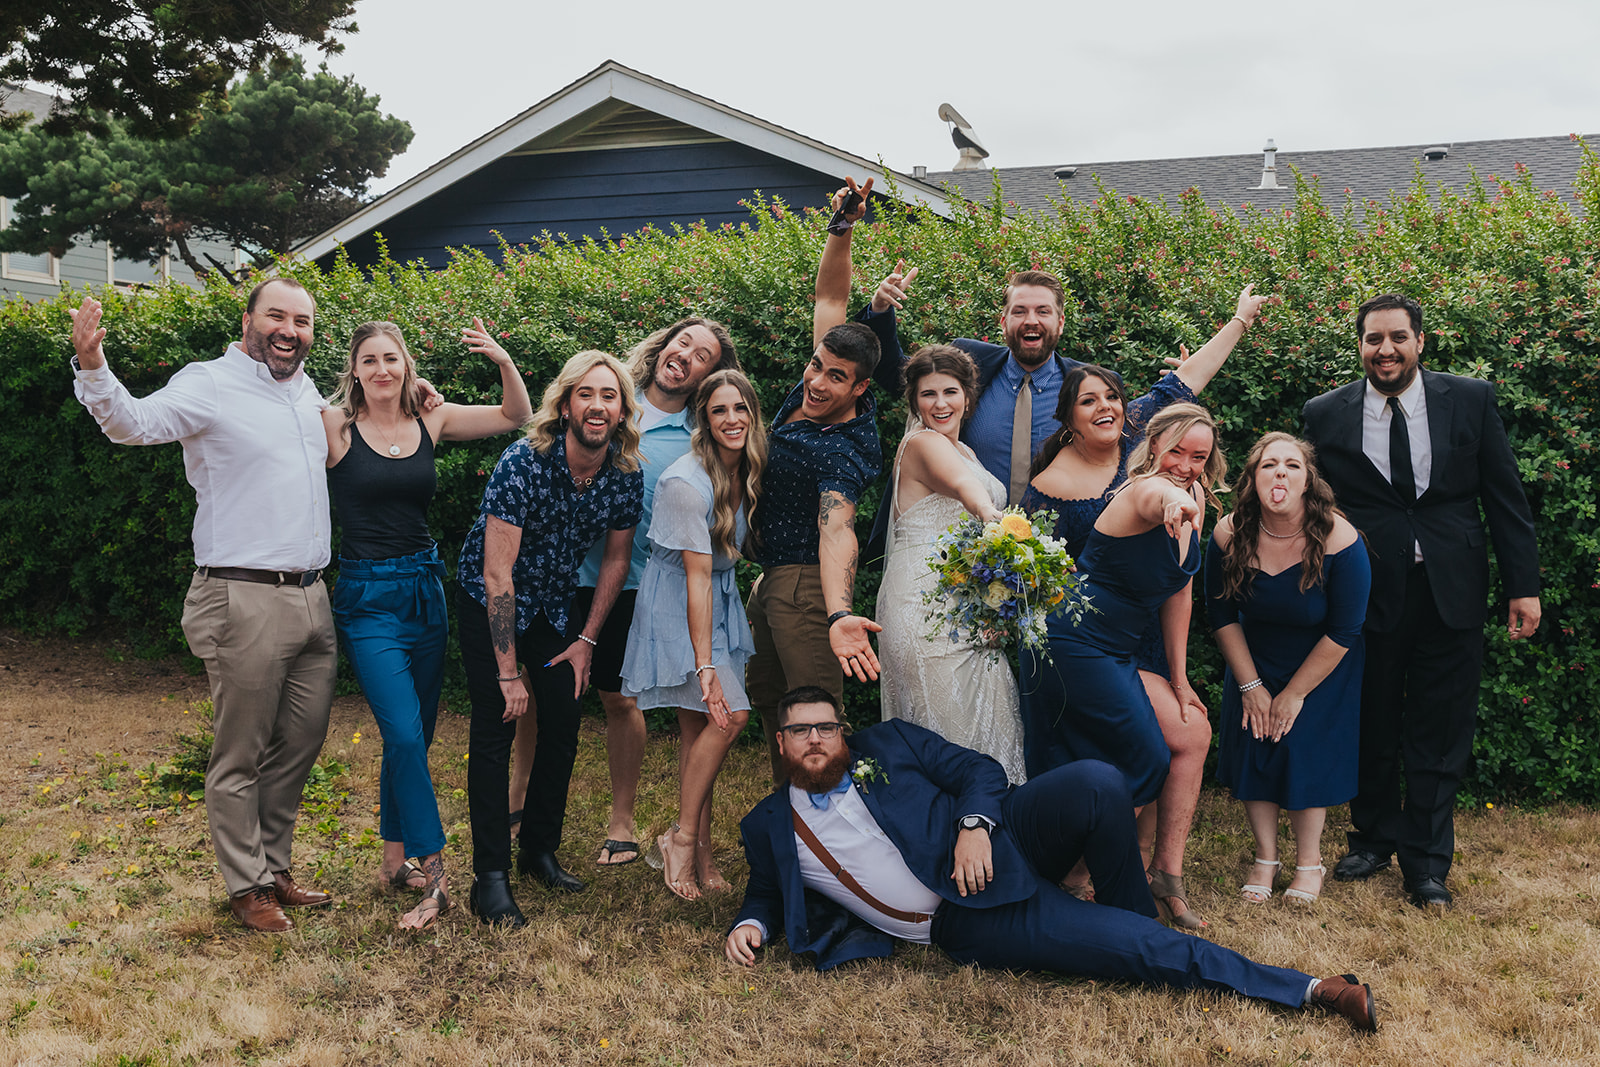 A fun group photo of a wedding party laughing and smiling at the camera